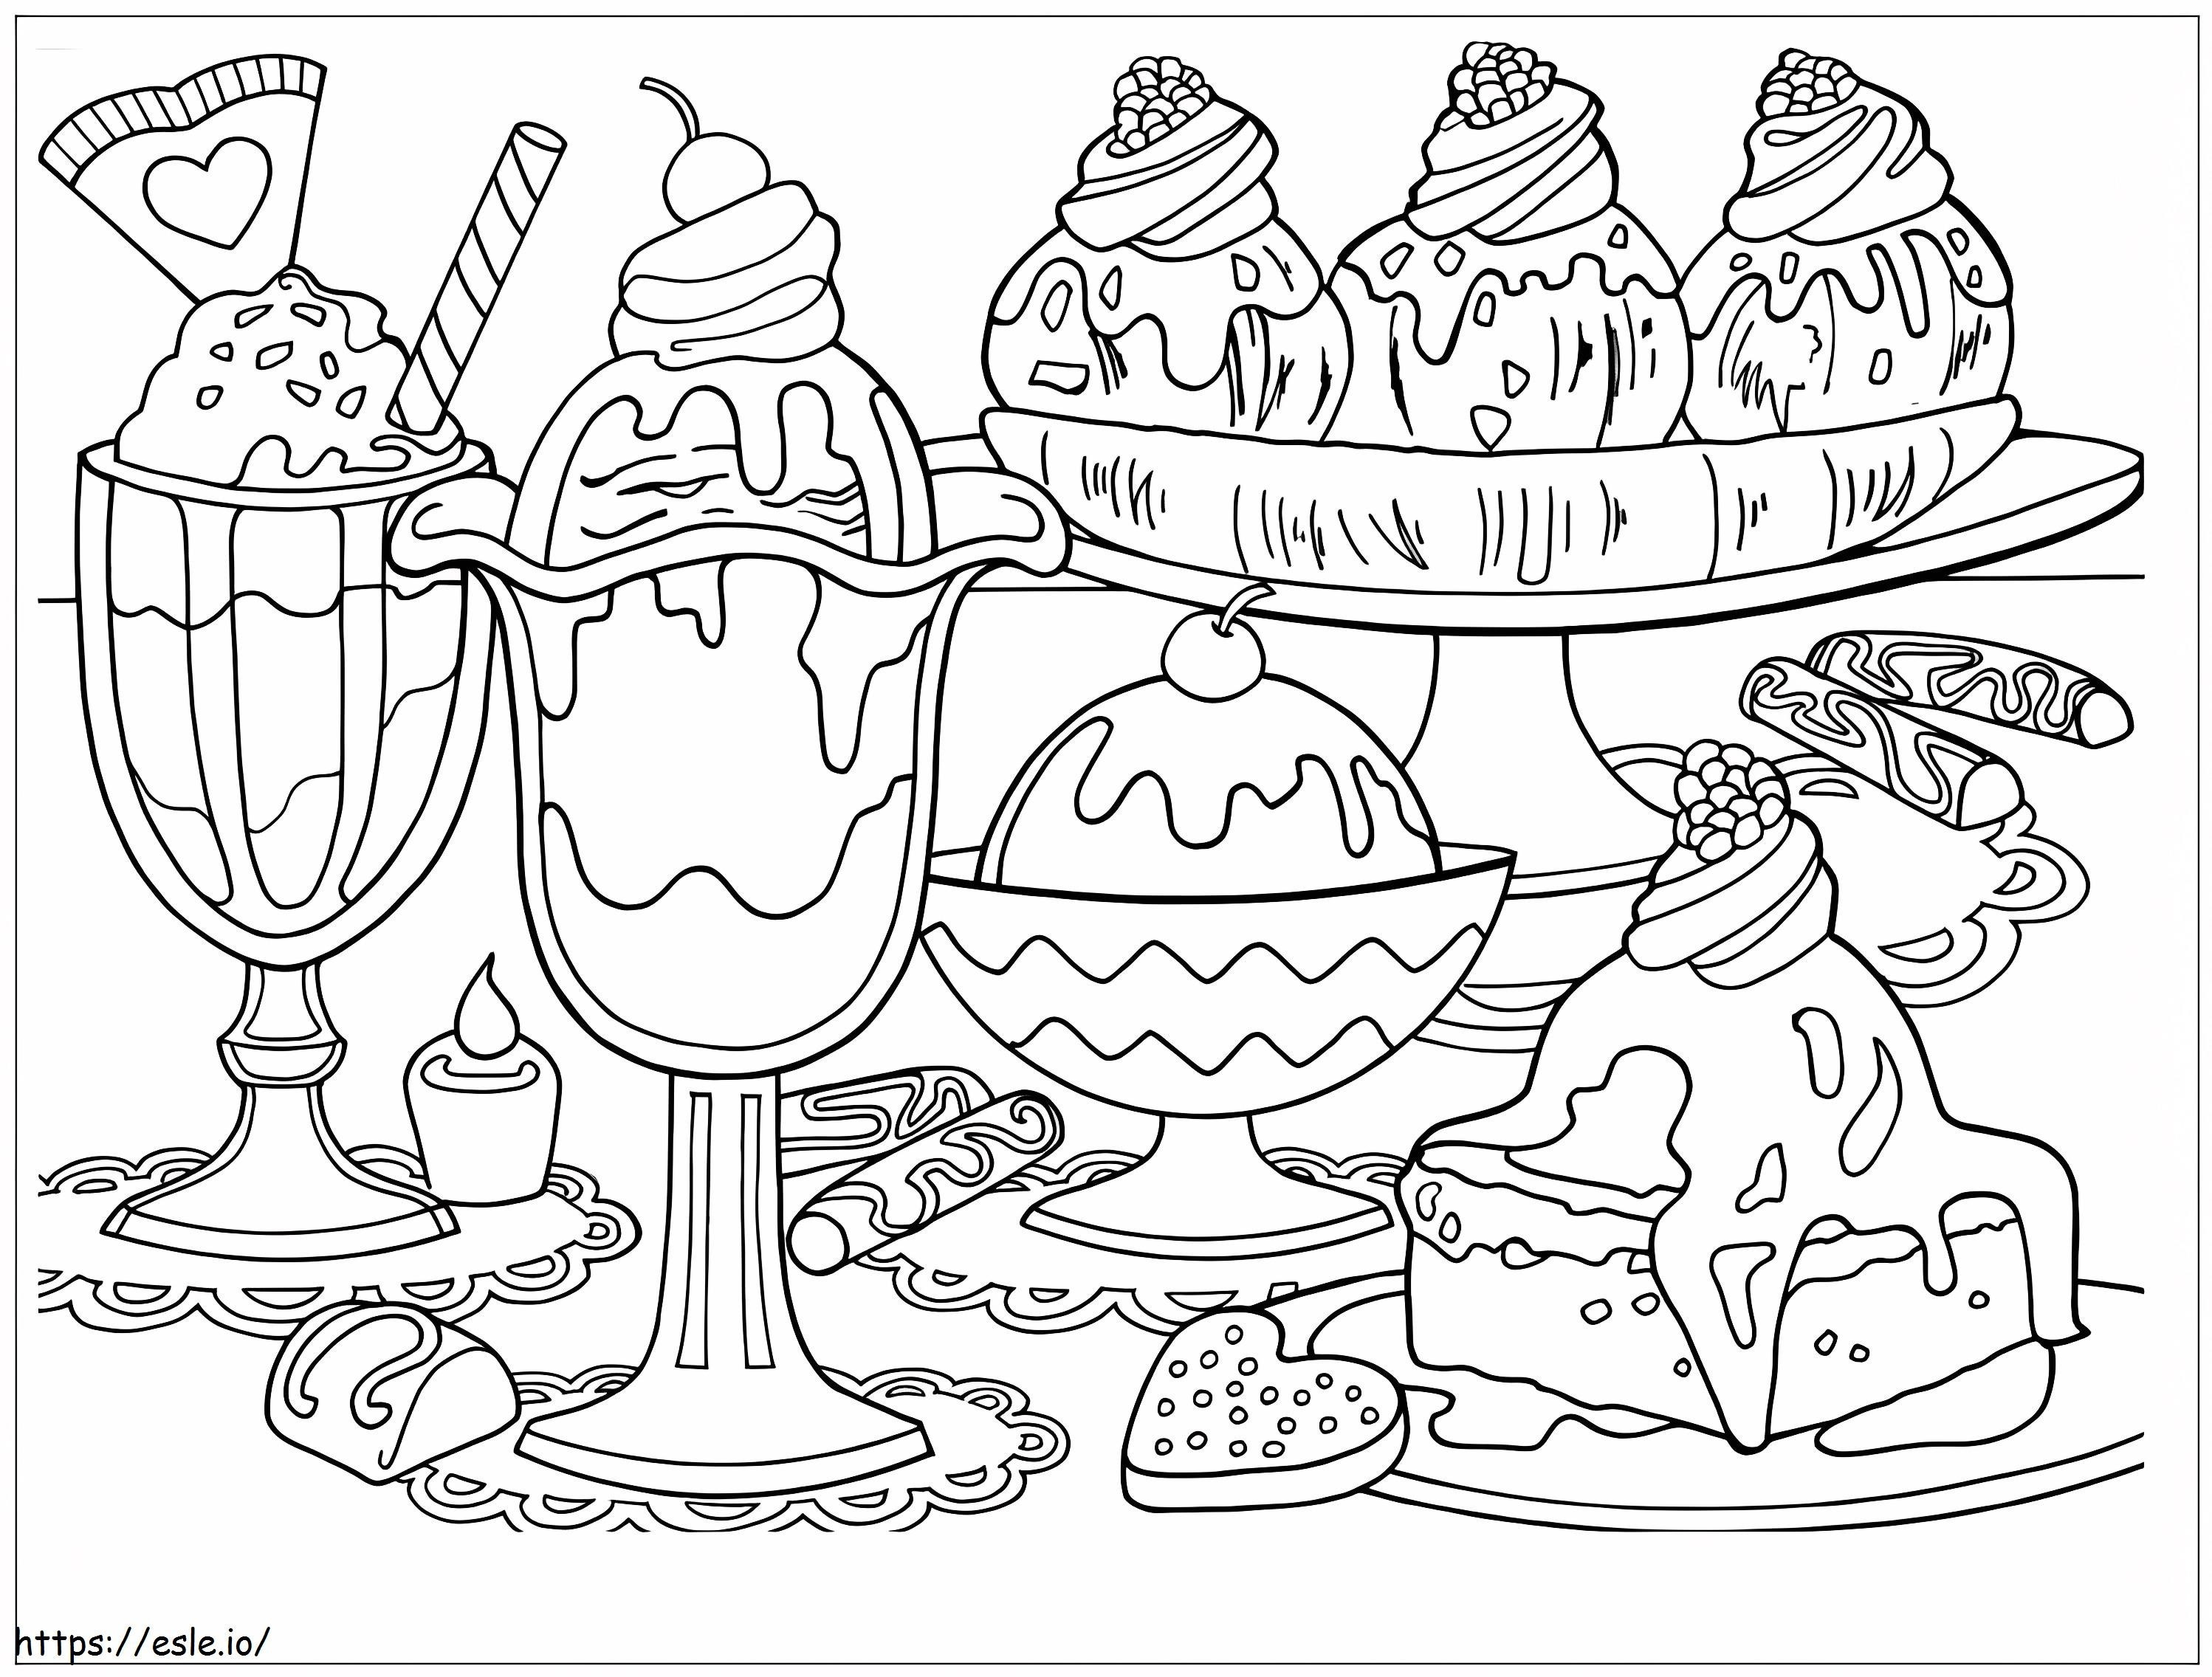 Best Dessert coloring page